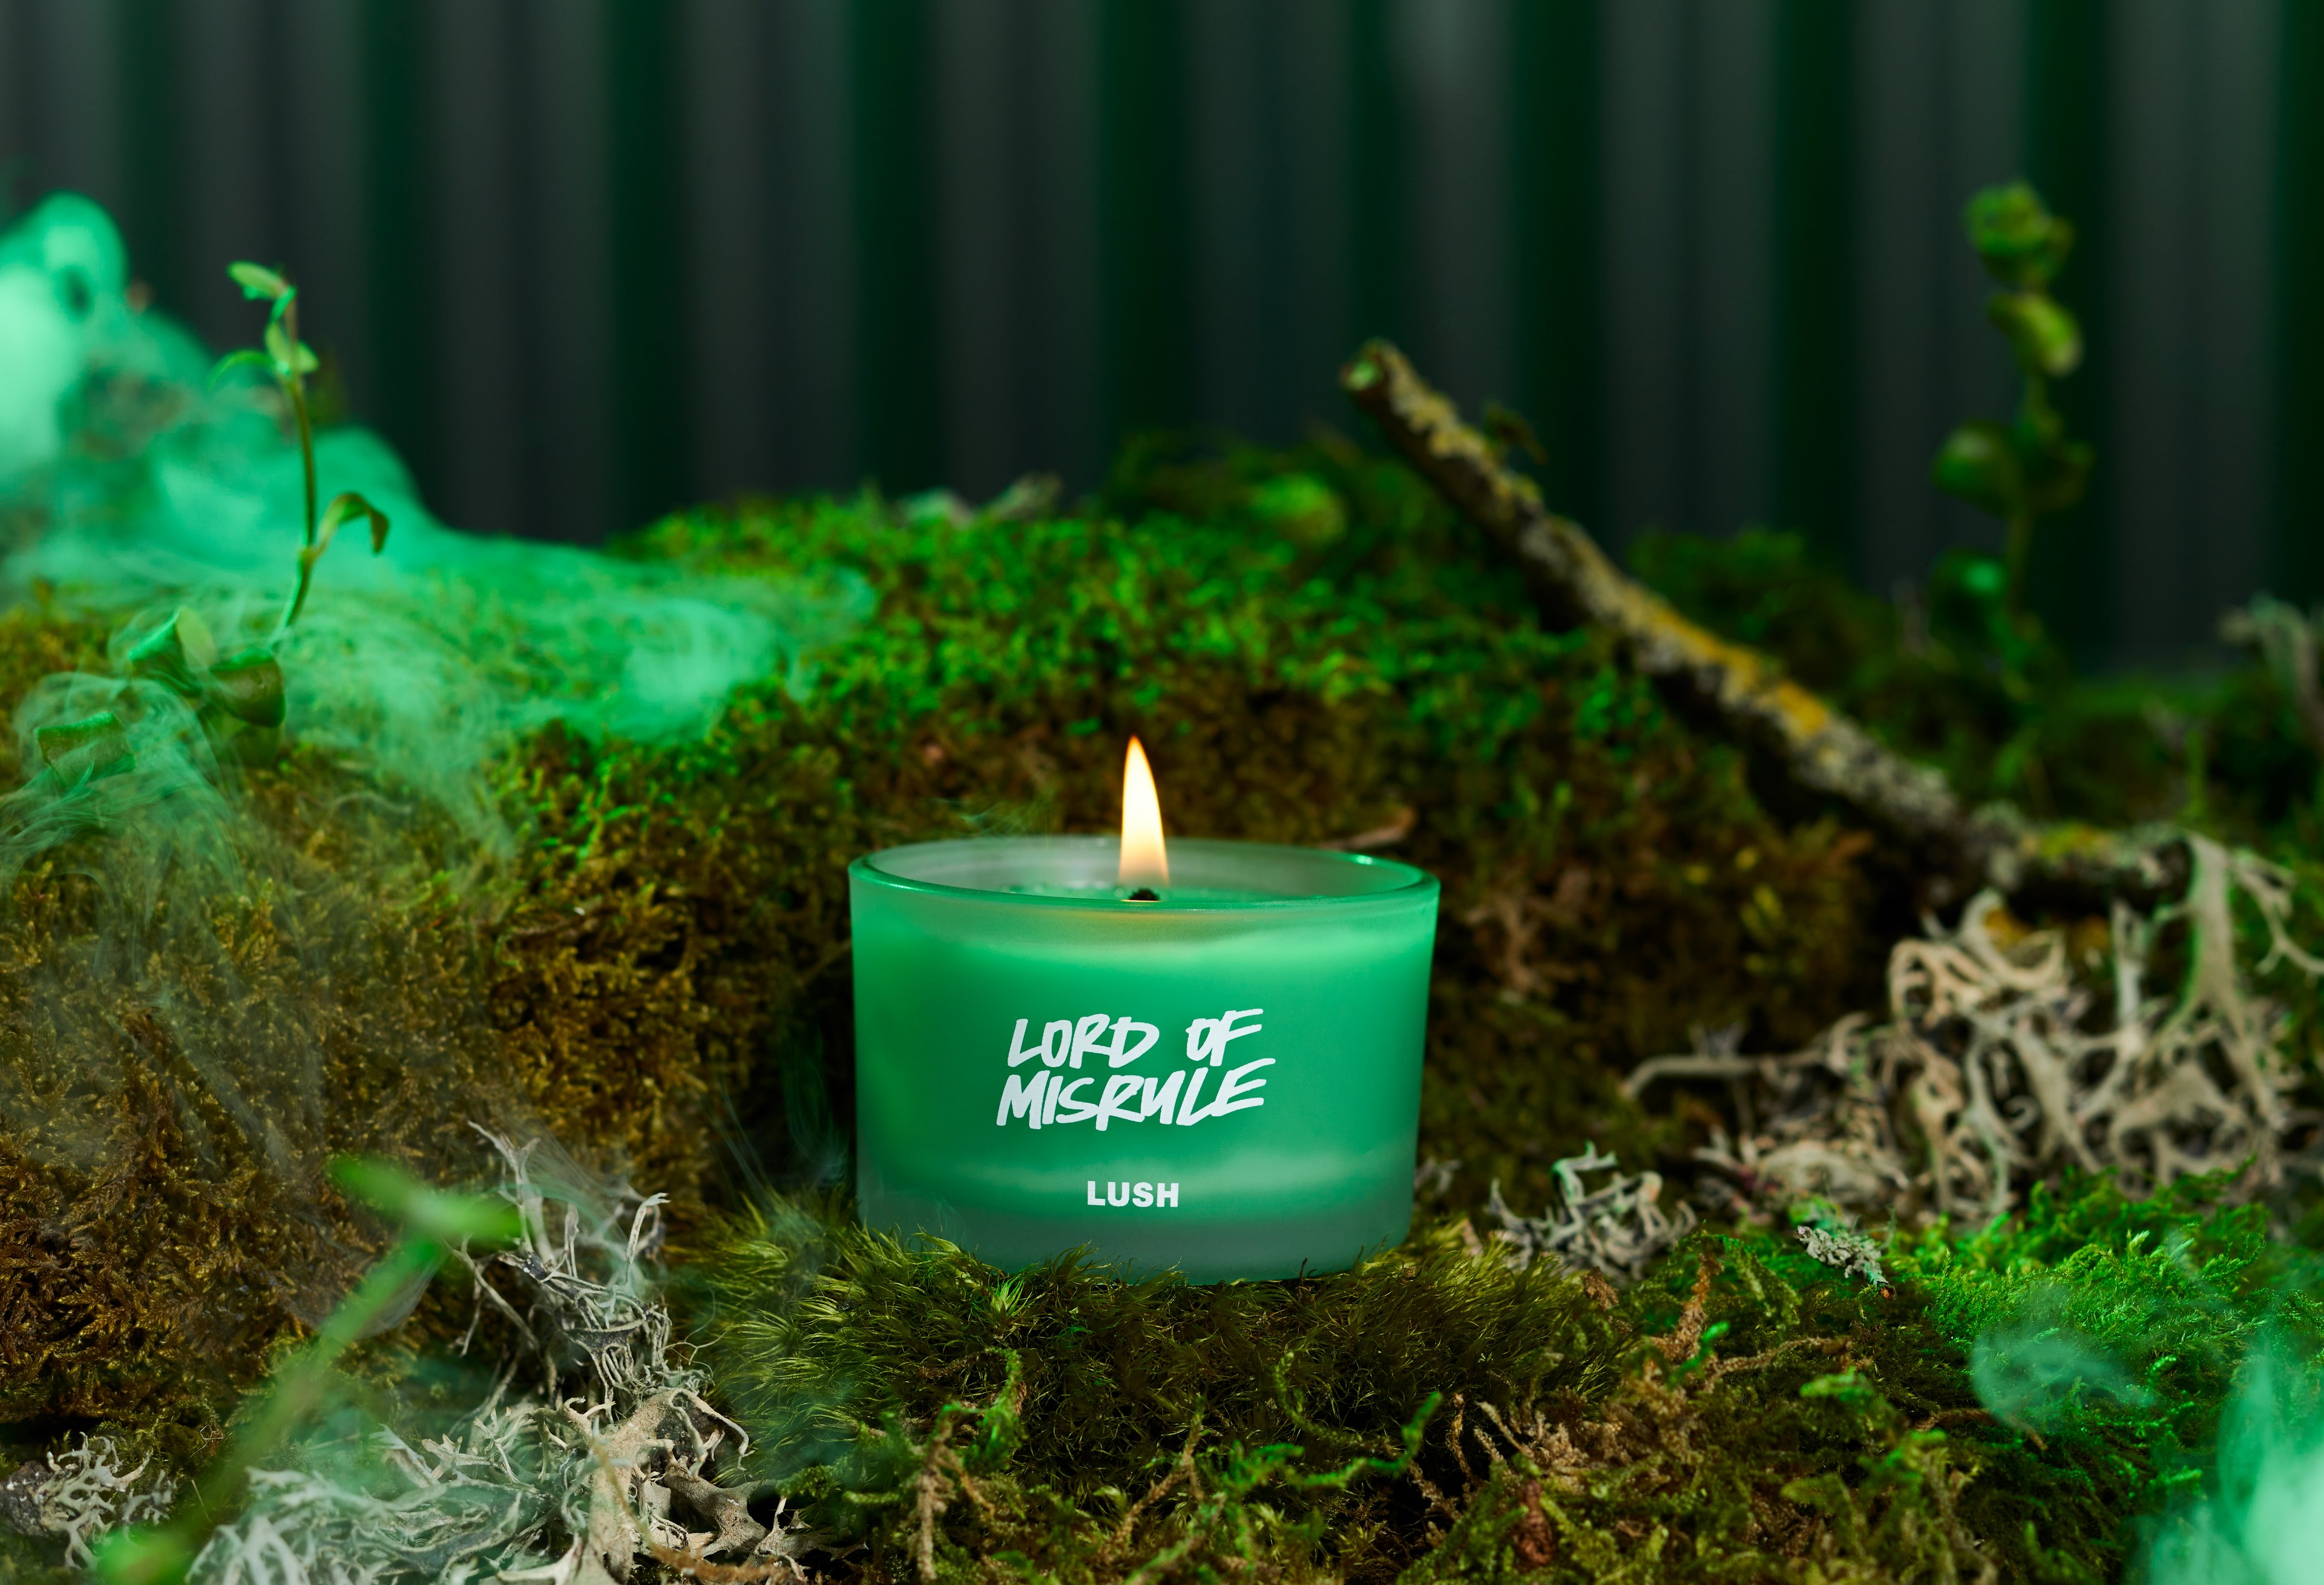 The candle sits alight in a green mossy display.